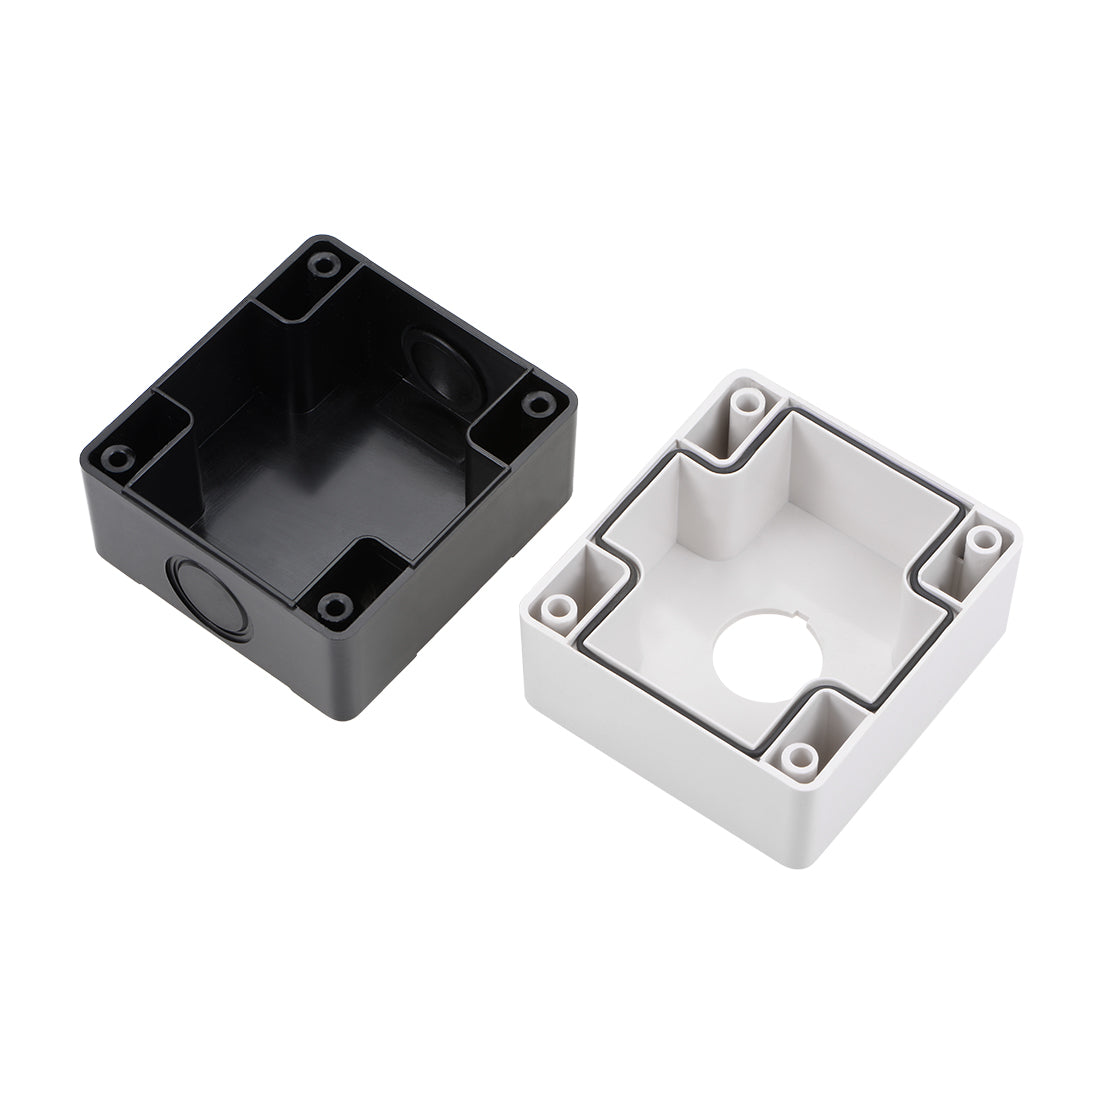 uxcell Uxcell Push Button Switch Control Station Box 22mm 1 Button Holes White and Black